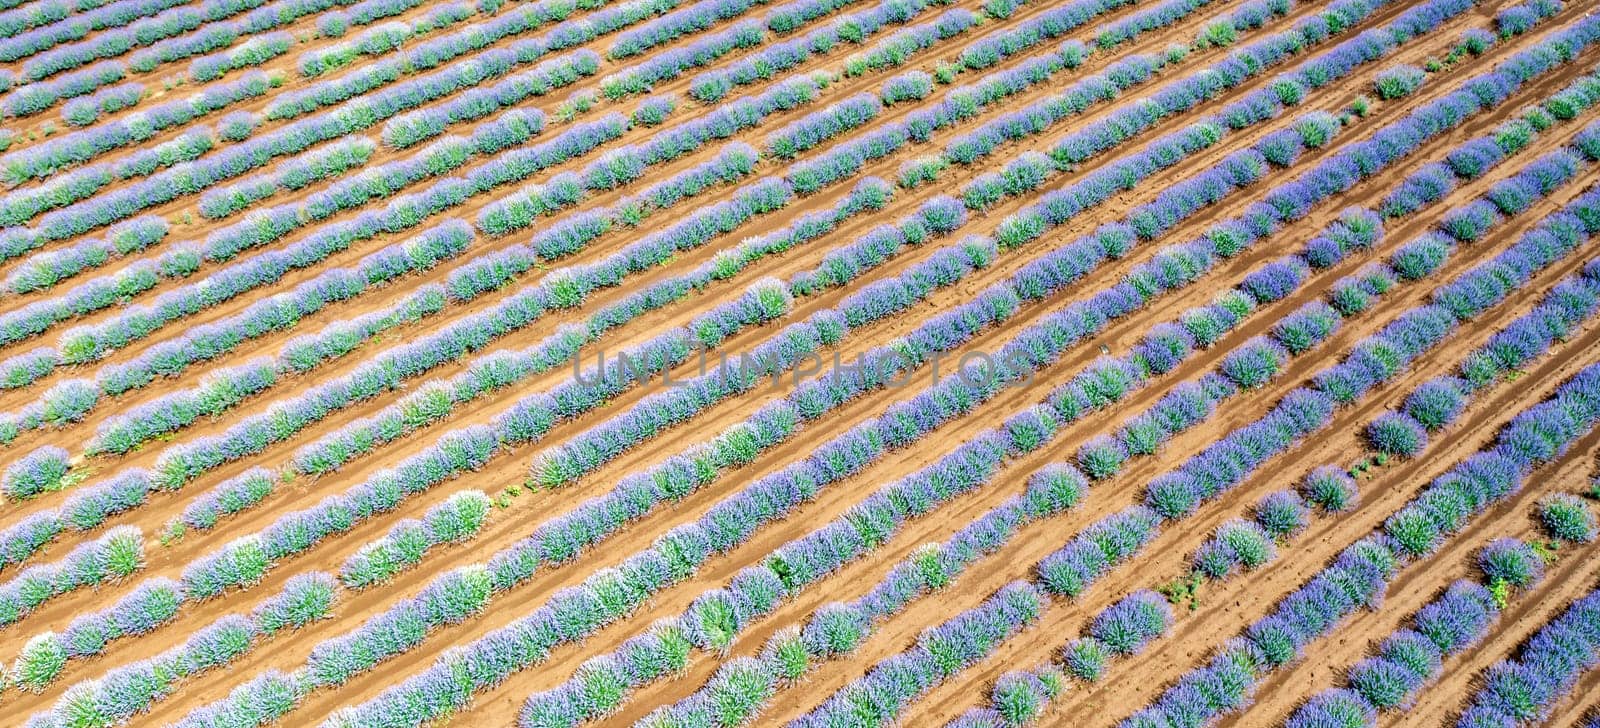 Beauty landscape of blooming lavender rows. Aerial view from drone. Nature background by EdVal